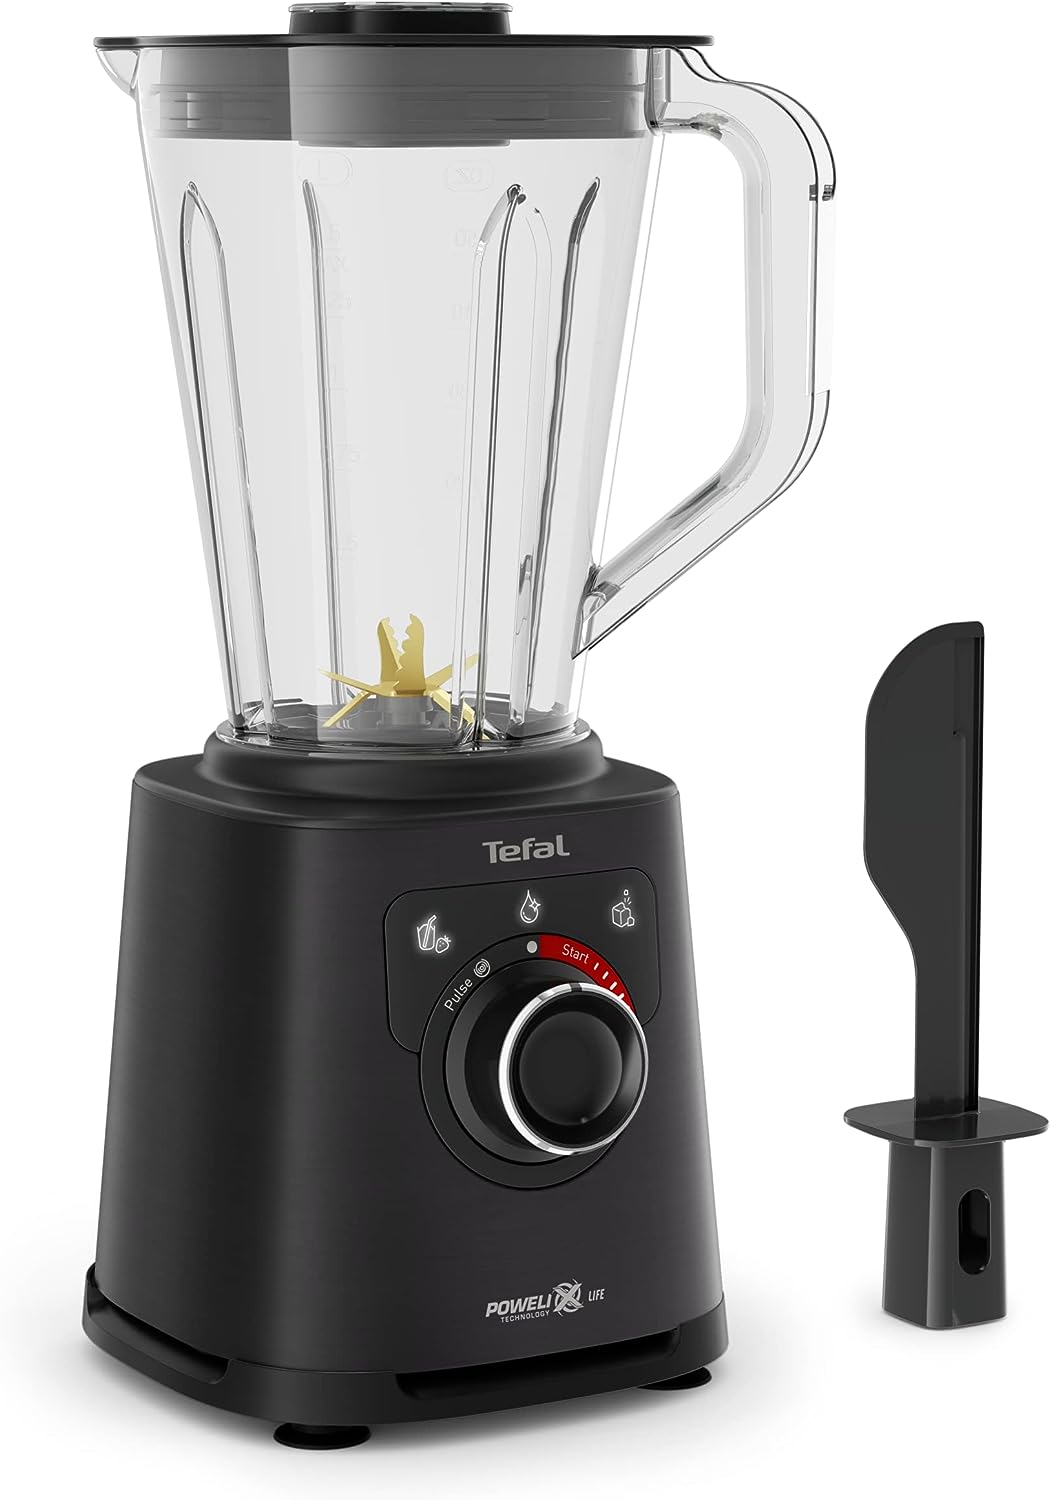 Tefal PerfectMix + High Speed Blender, Powelix Life Technology for Quick Results, Easy to Clean, Powerful Glare, 2L Lightweight and Shatterproof Tritan Jug, BL88A831